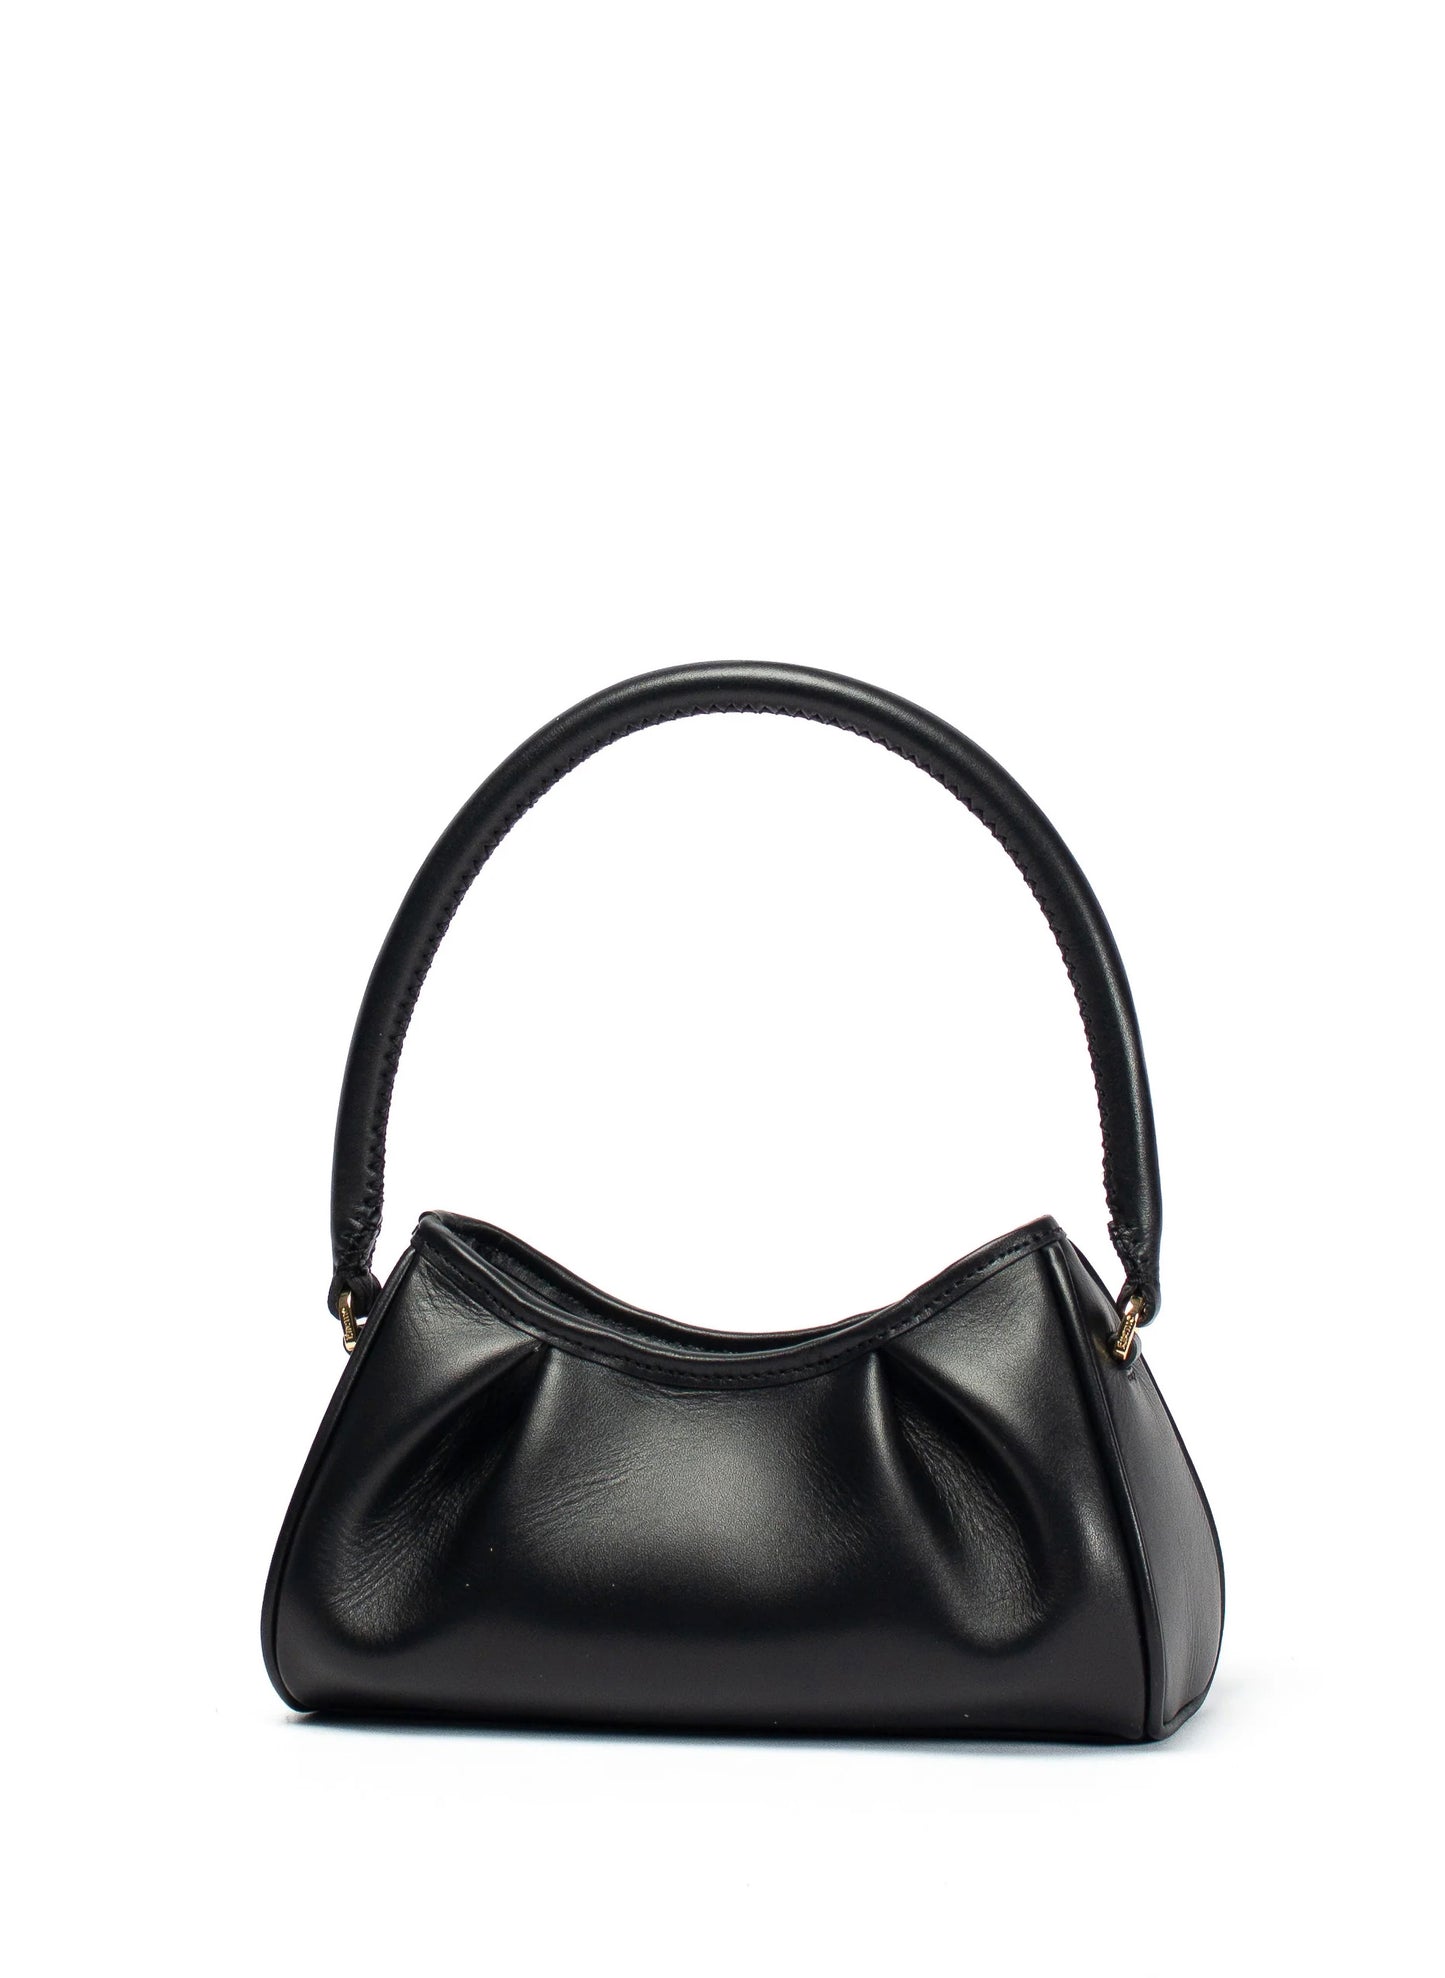 Small Dimple Leather Black